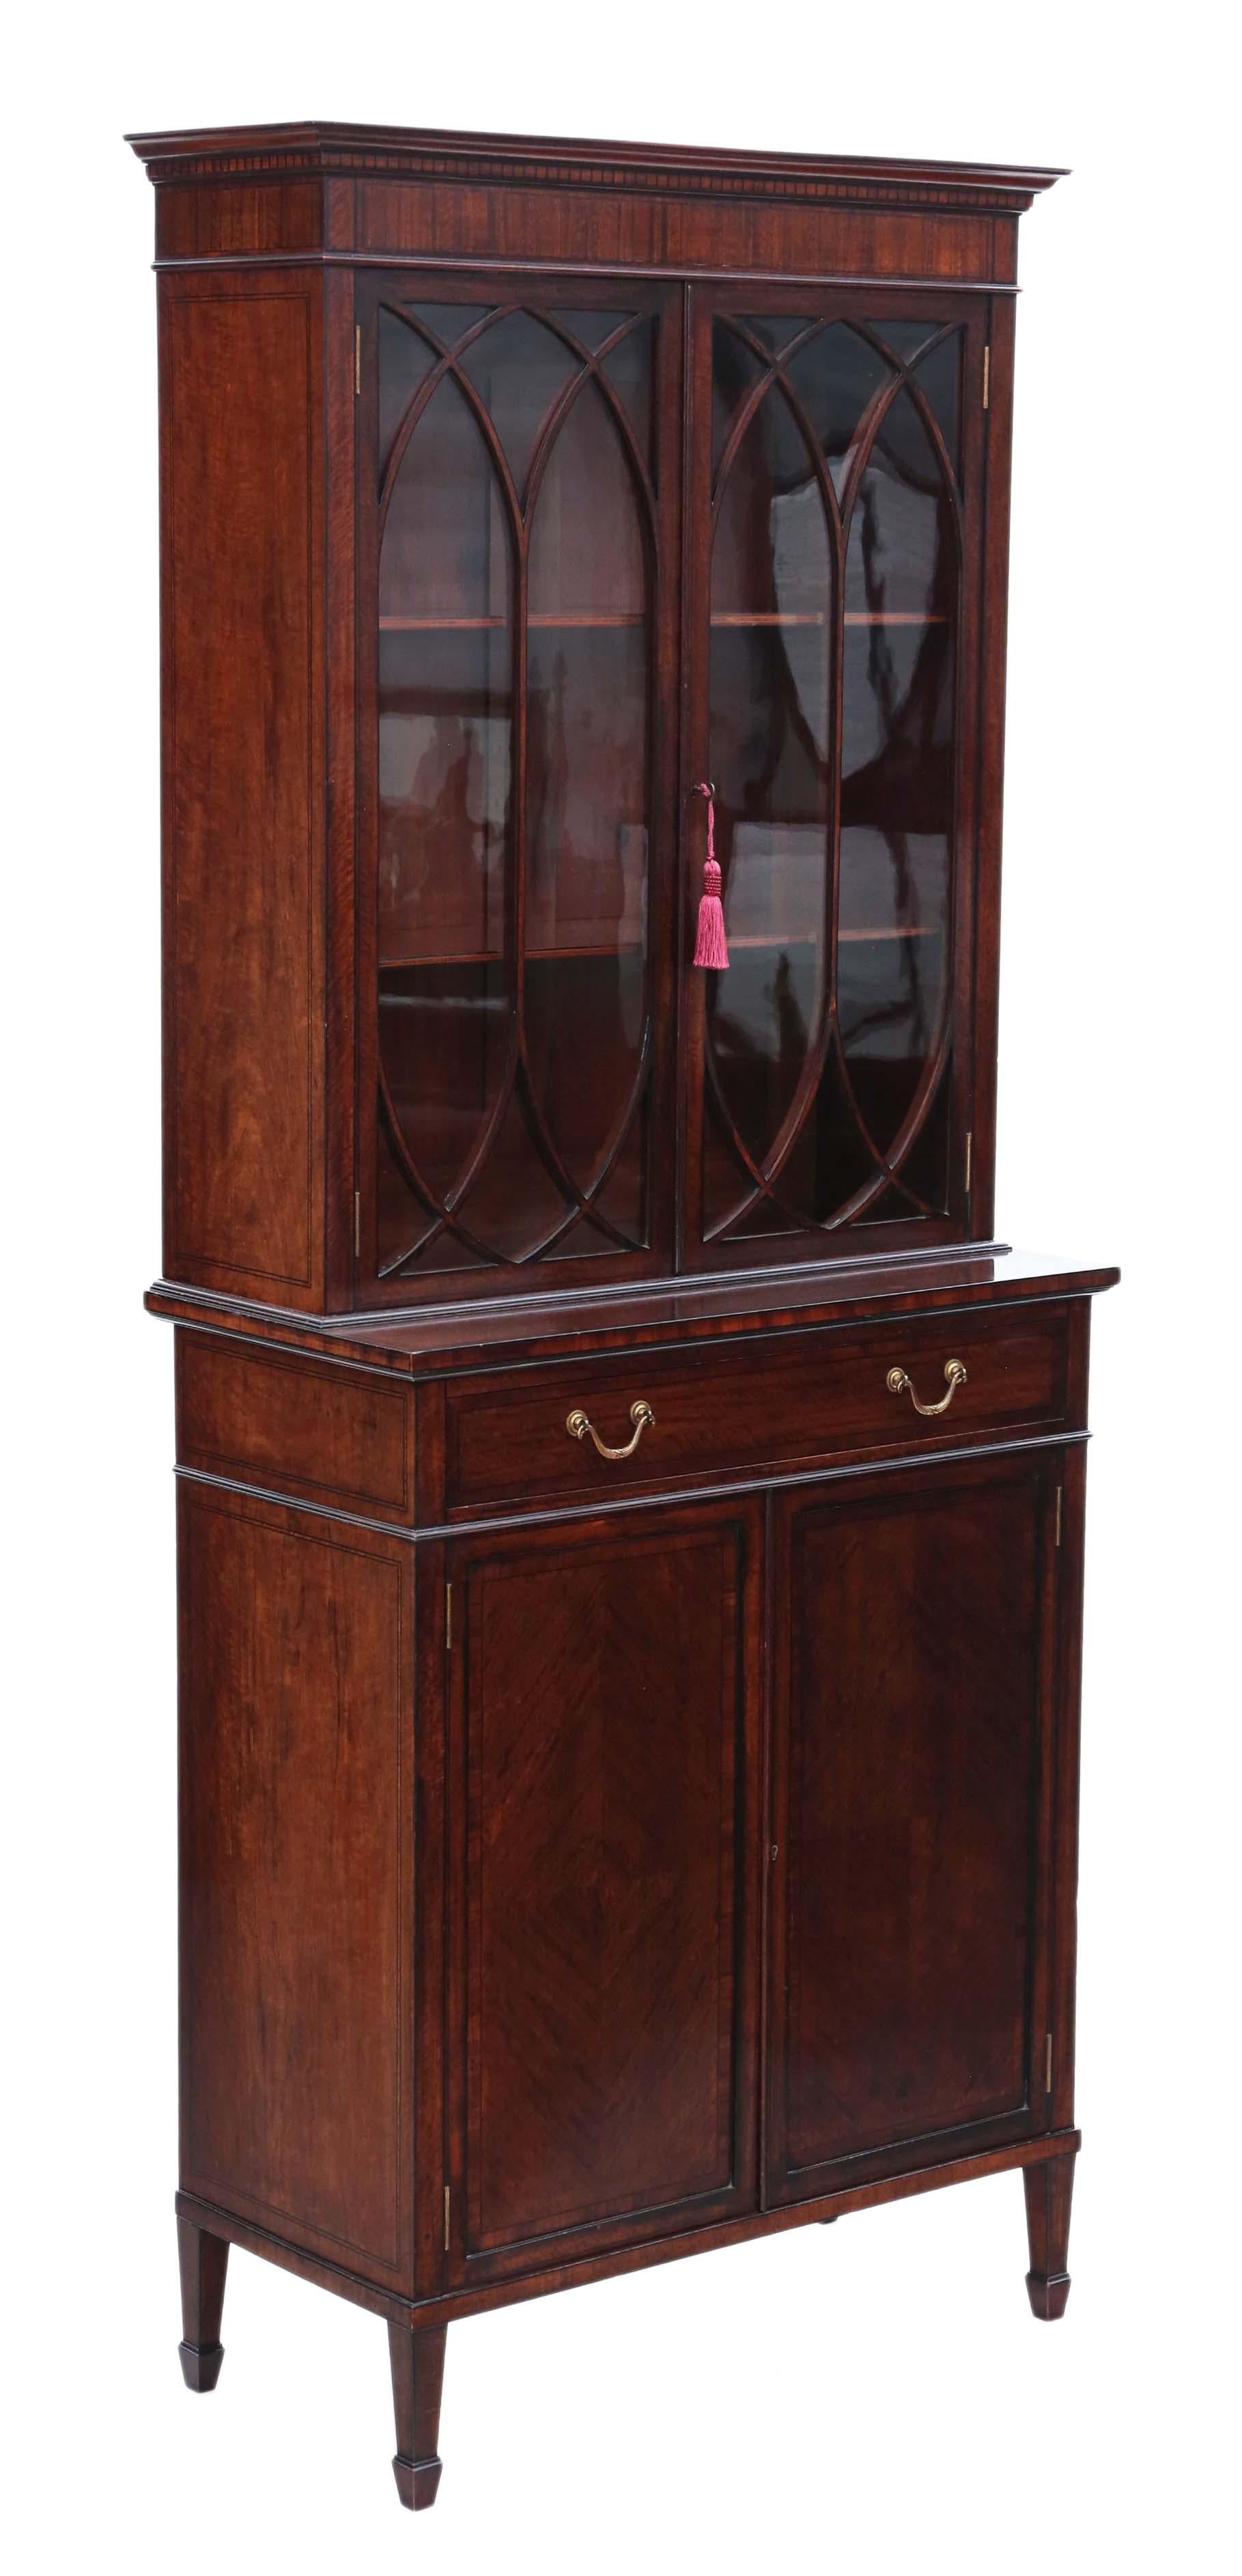 Antique fine quality 19th century Georgian revival mahogany glazed bookcase on cupboard, circa 1890.

Compact sought after size. We have a key for the top and bottom doors.

Finest quality 'plum pudding' mahogany veneers in great condition, with